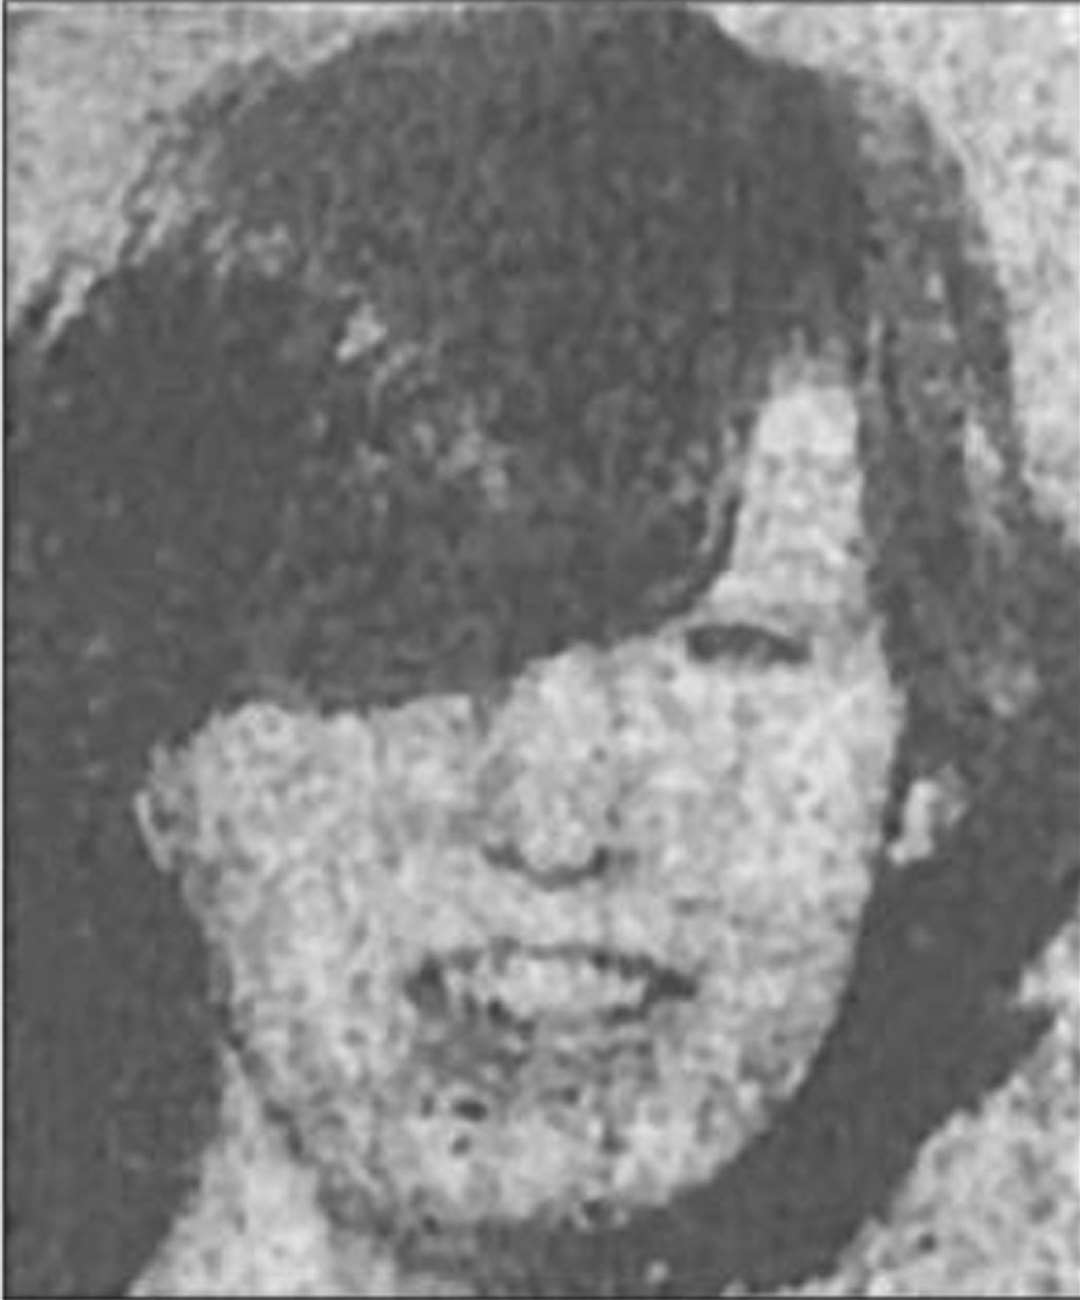 Jacqui Montgomery. was killed by McGrory in 1975 (Crown Prosecution Service/PA)